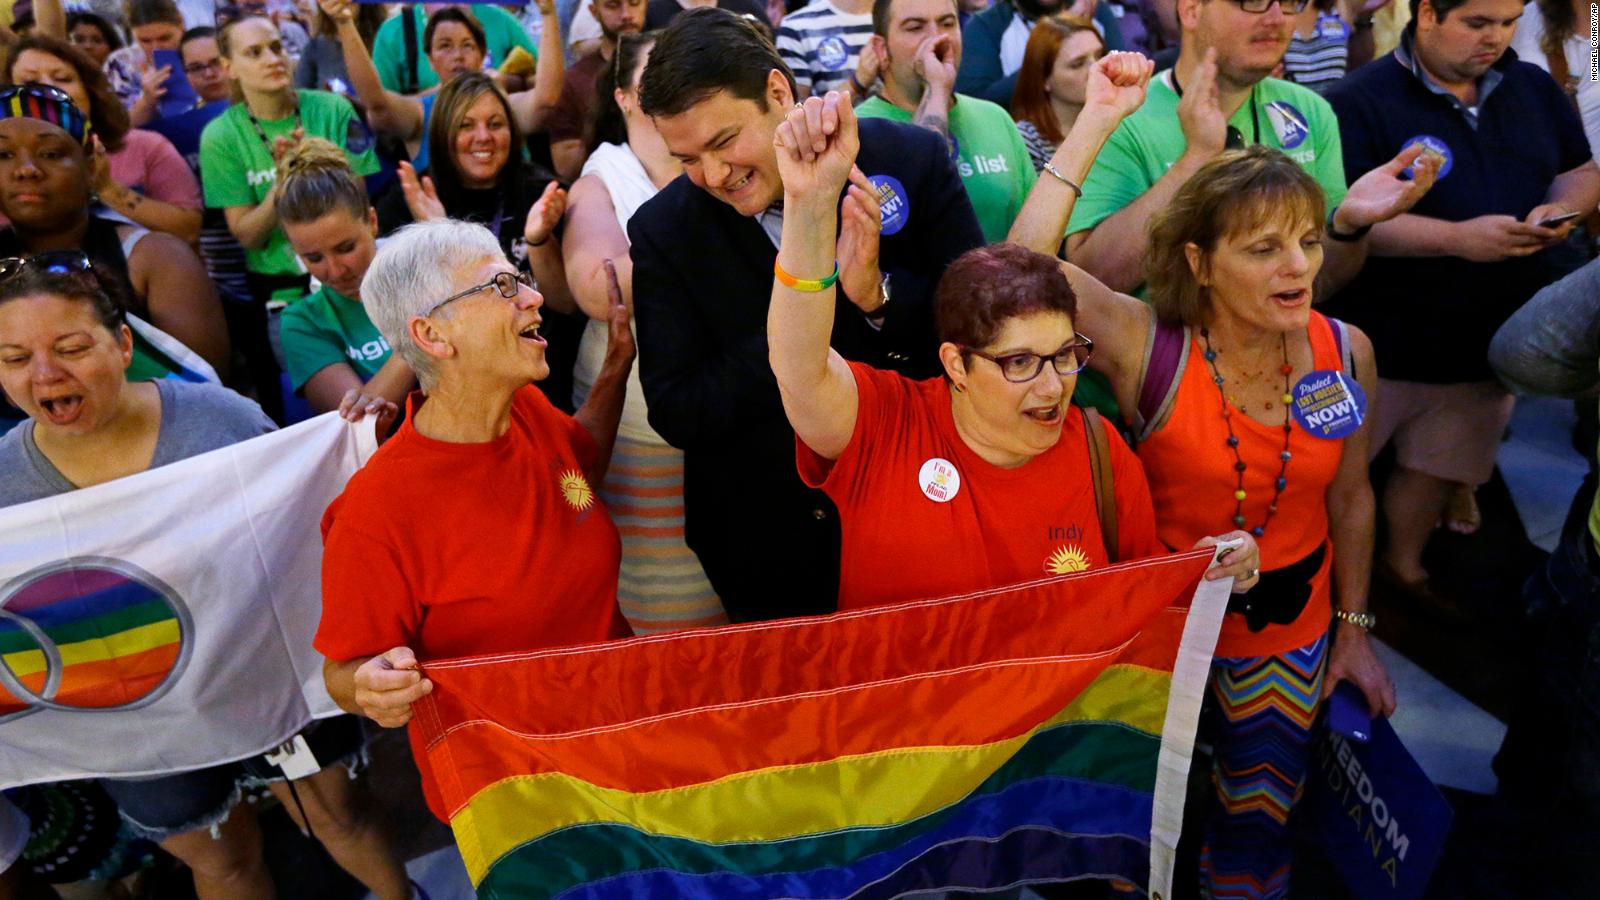 Indiana samesex couples asked a federal court to be listed on their